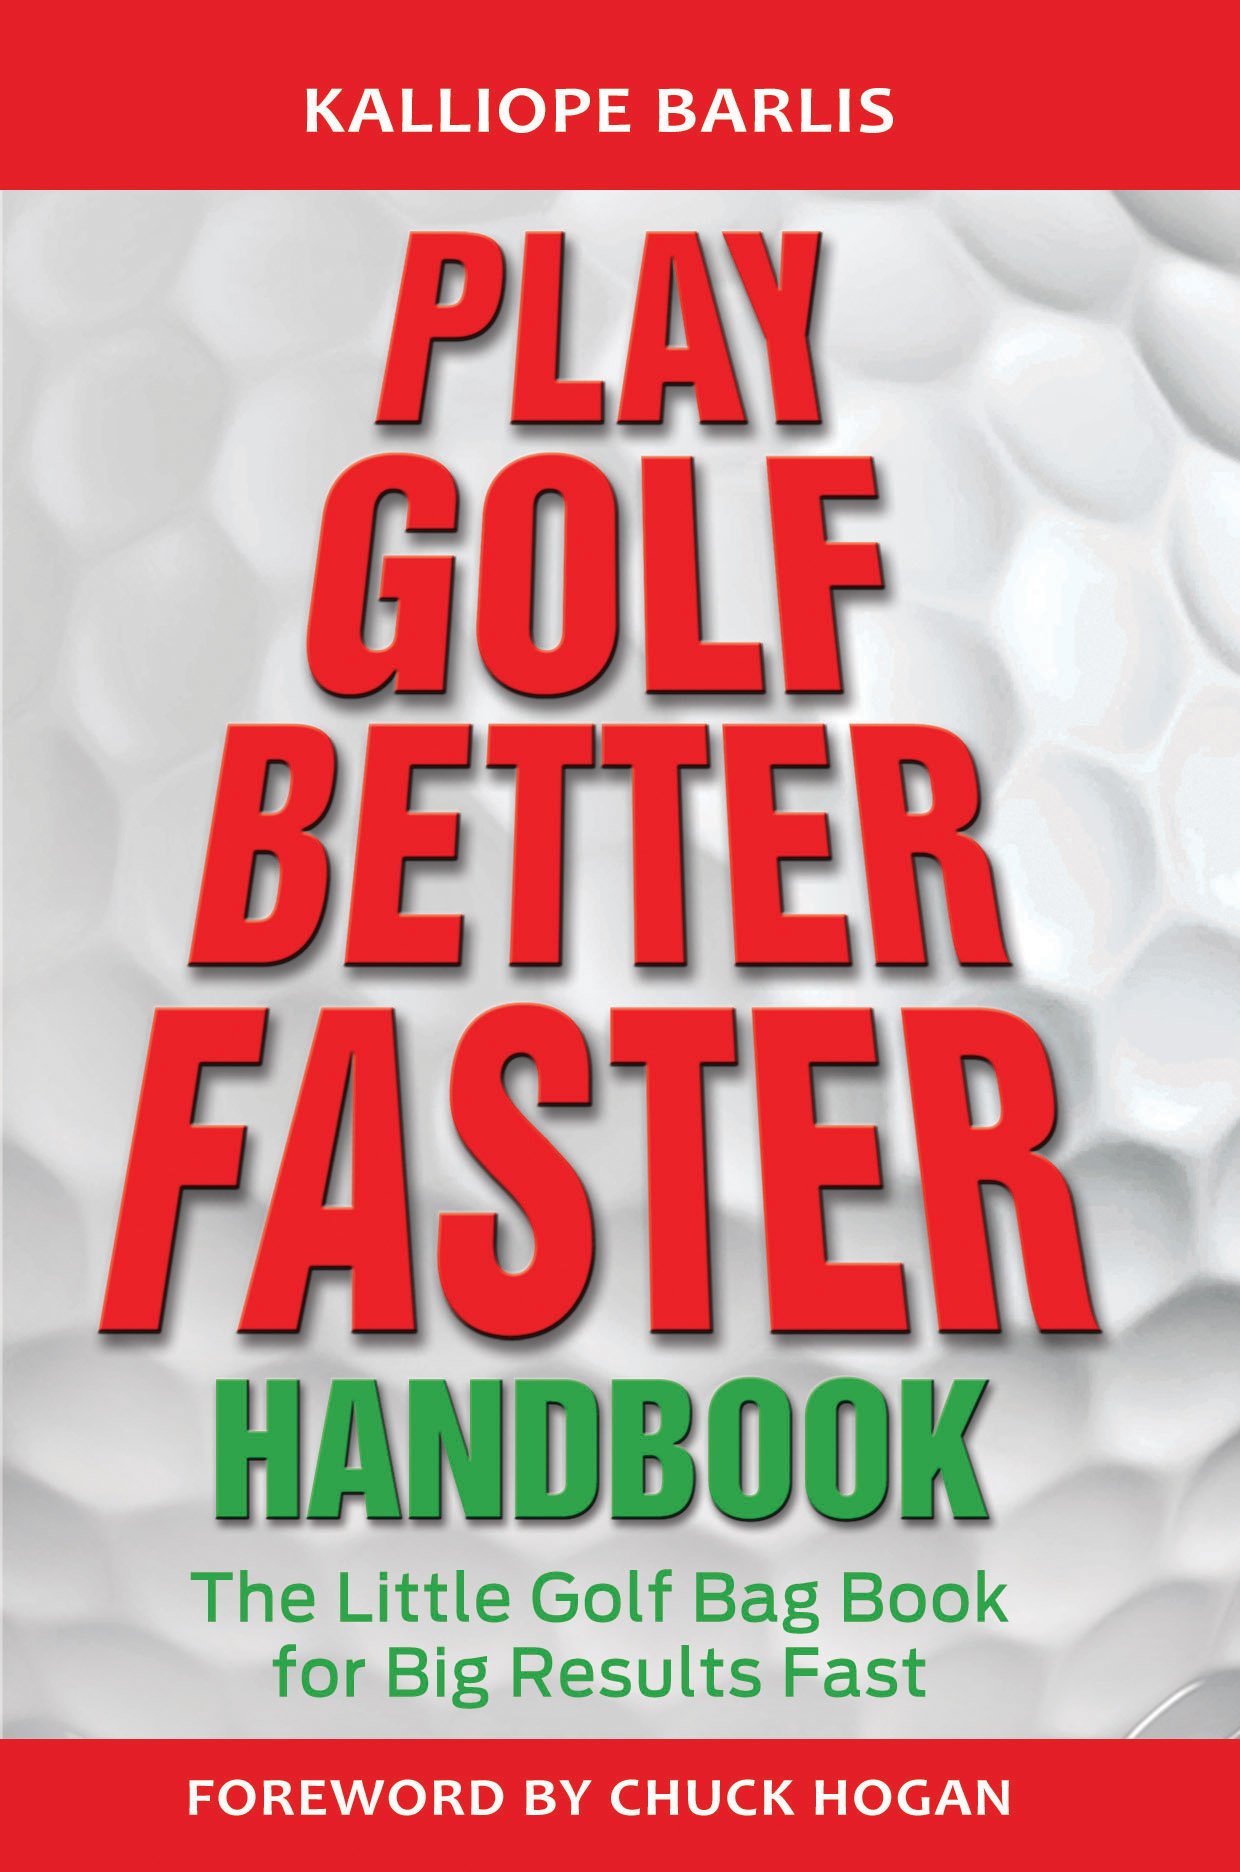 Play Golf Better Faster Handbook: The Little Golf Bag Book for Big Results Fast